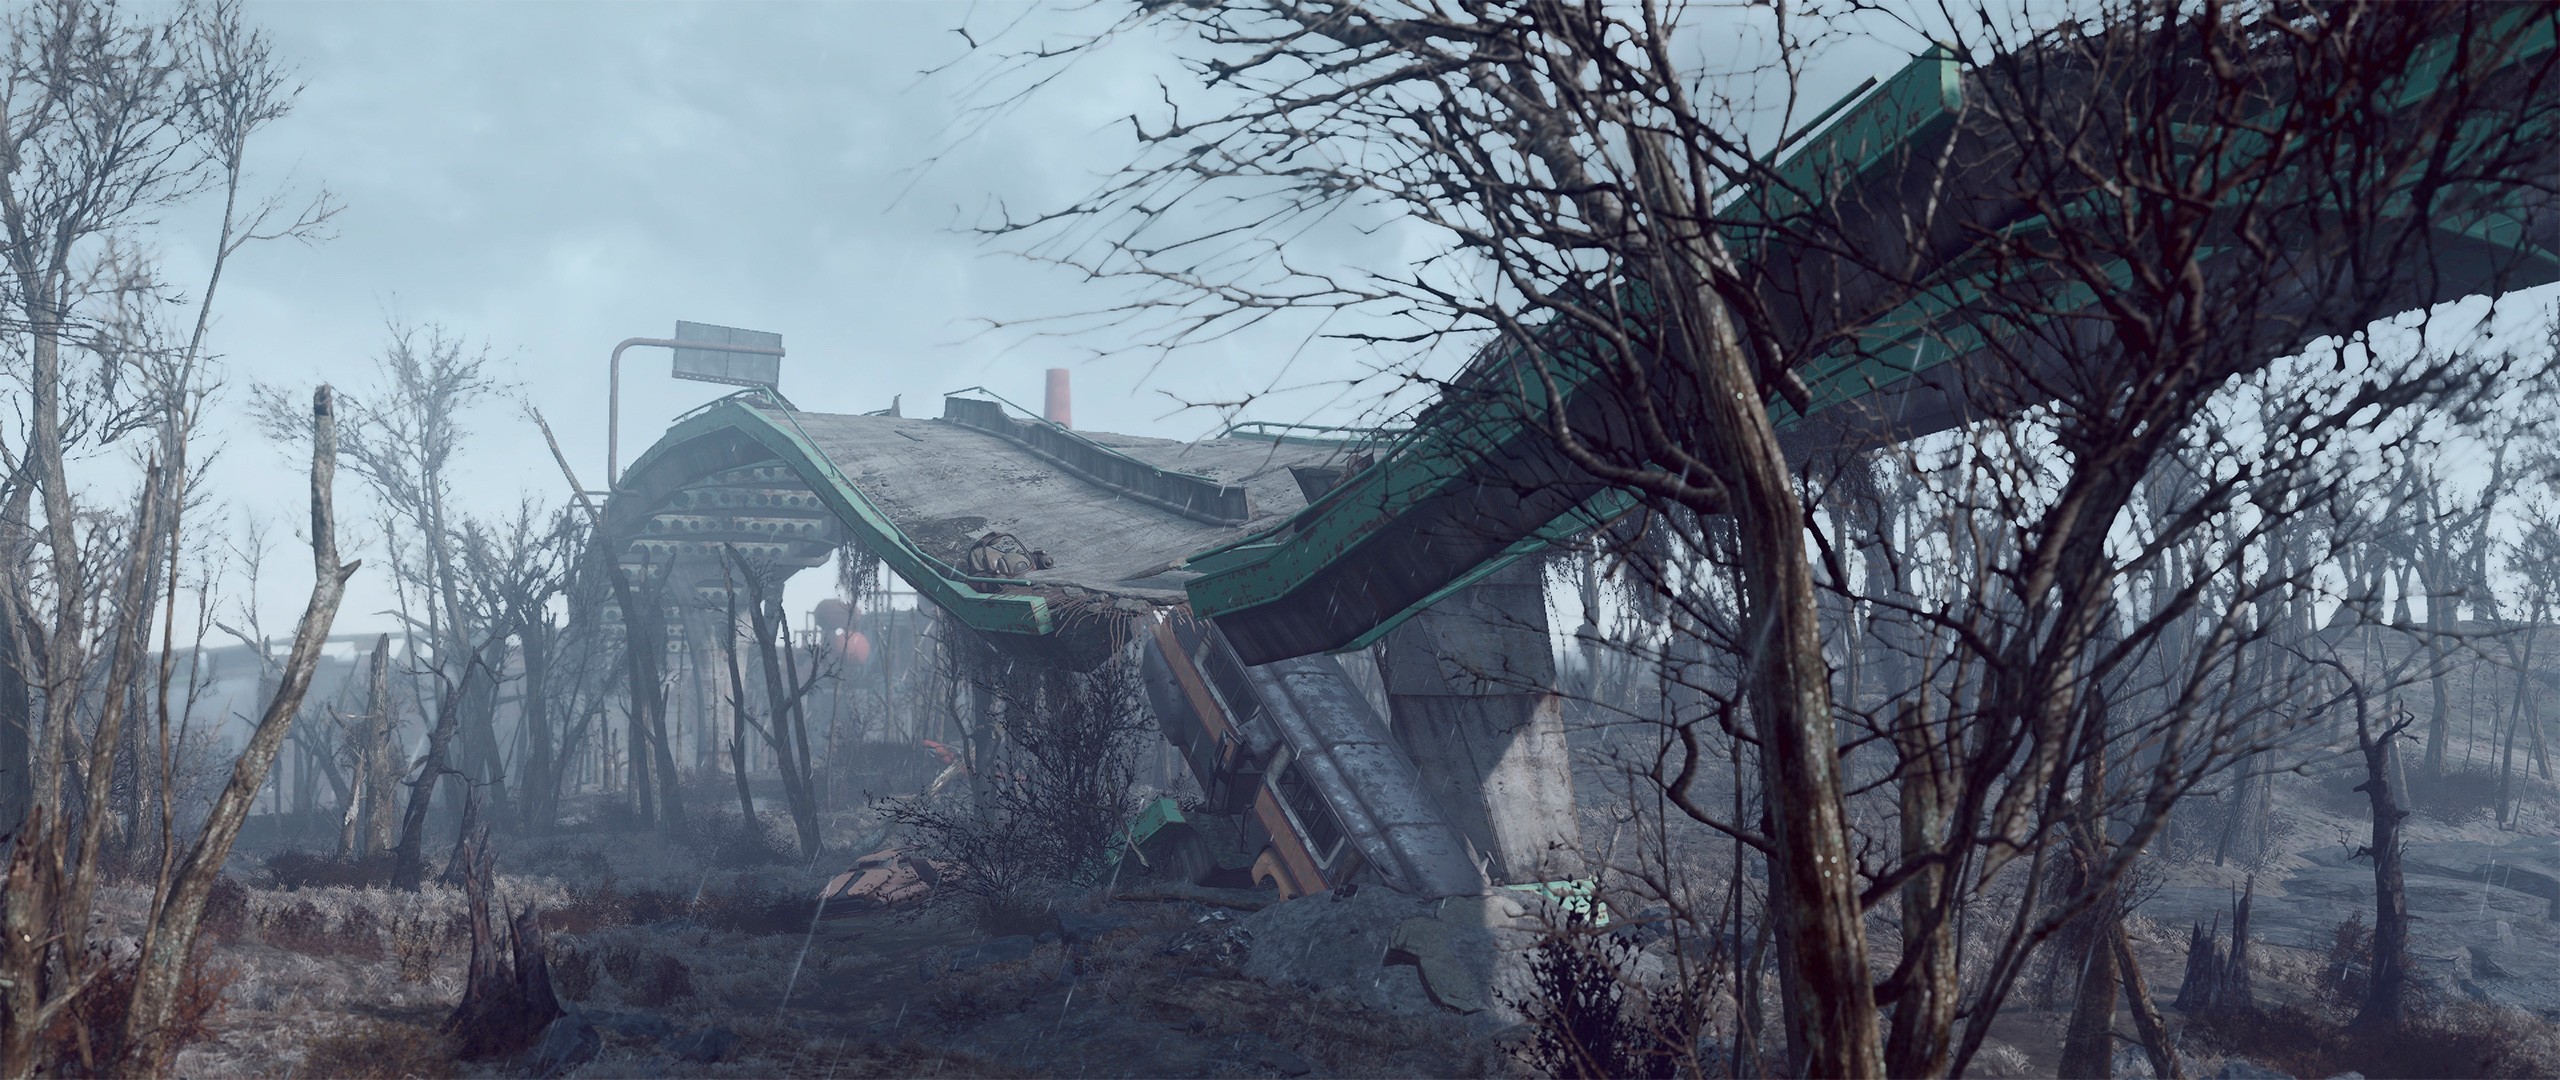 General 2560x1080 video games Fallout 4 Fallout PC gaming apocalyptic ruins screen shot Bethesda Softworks